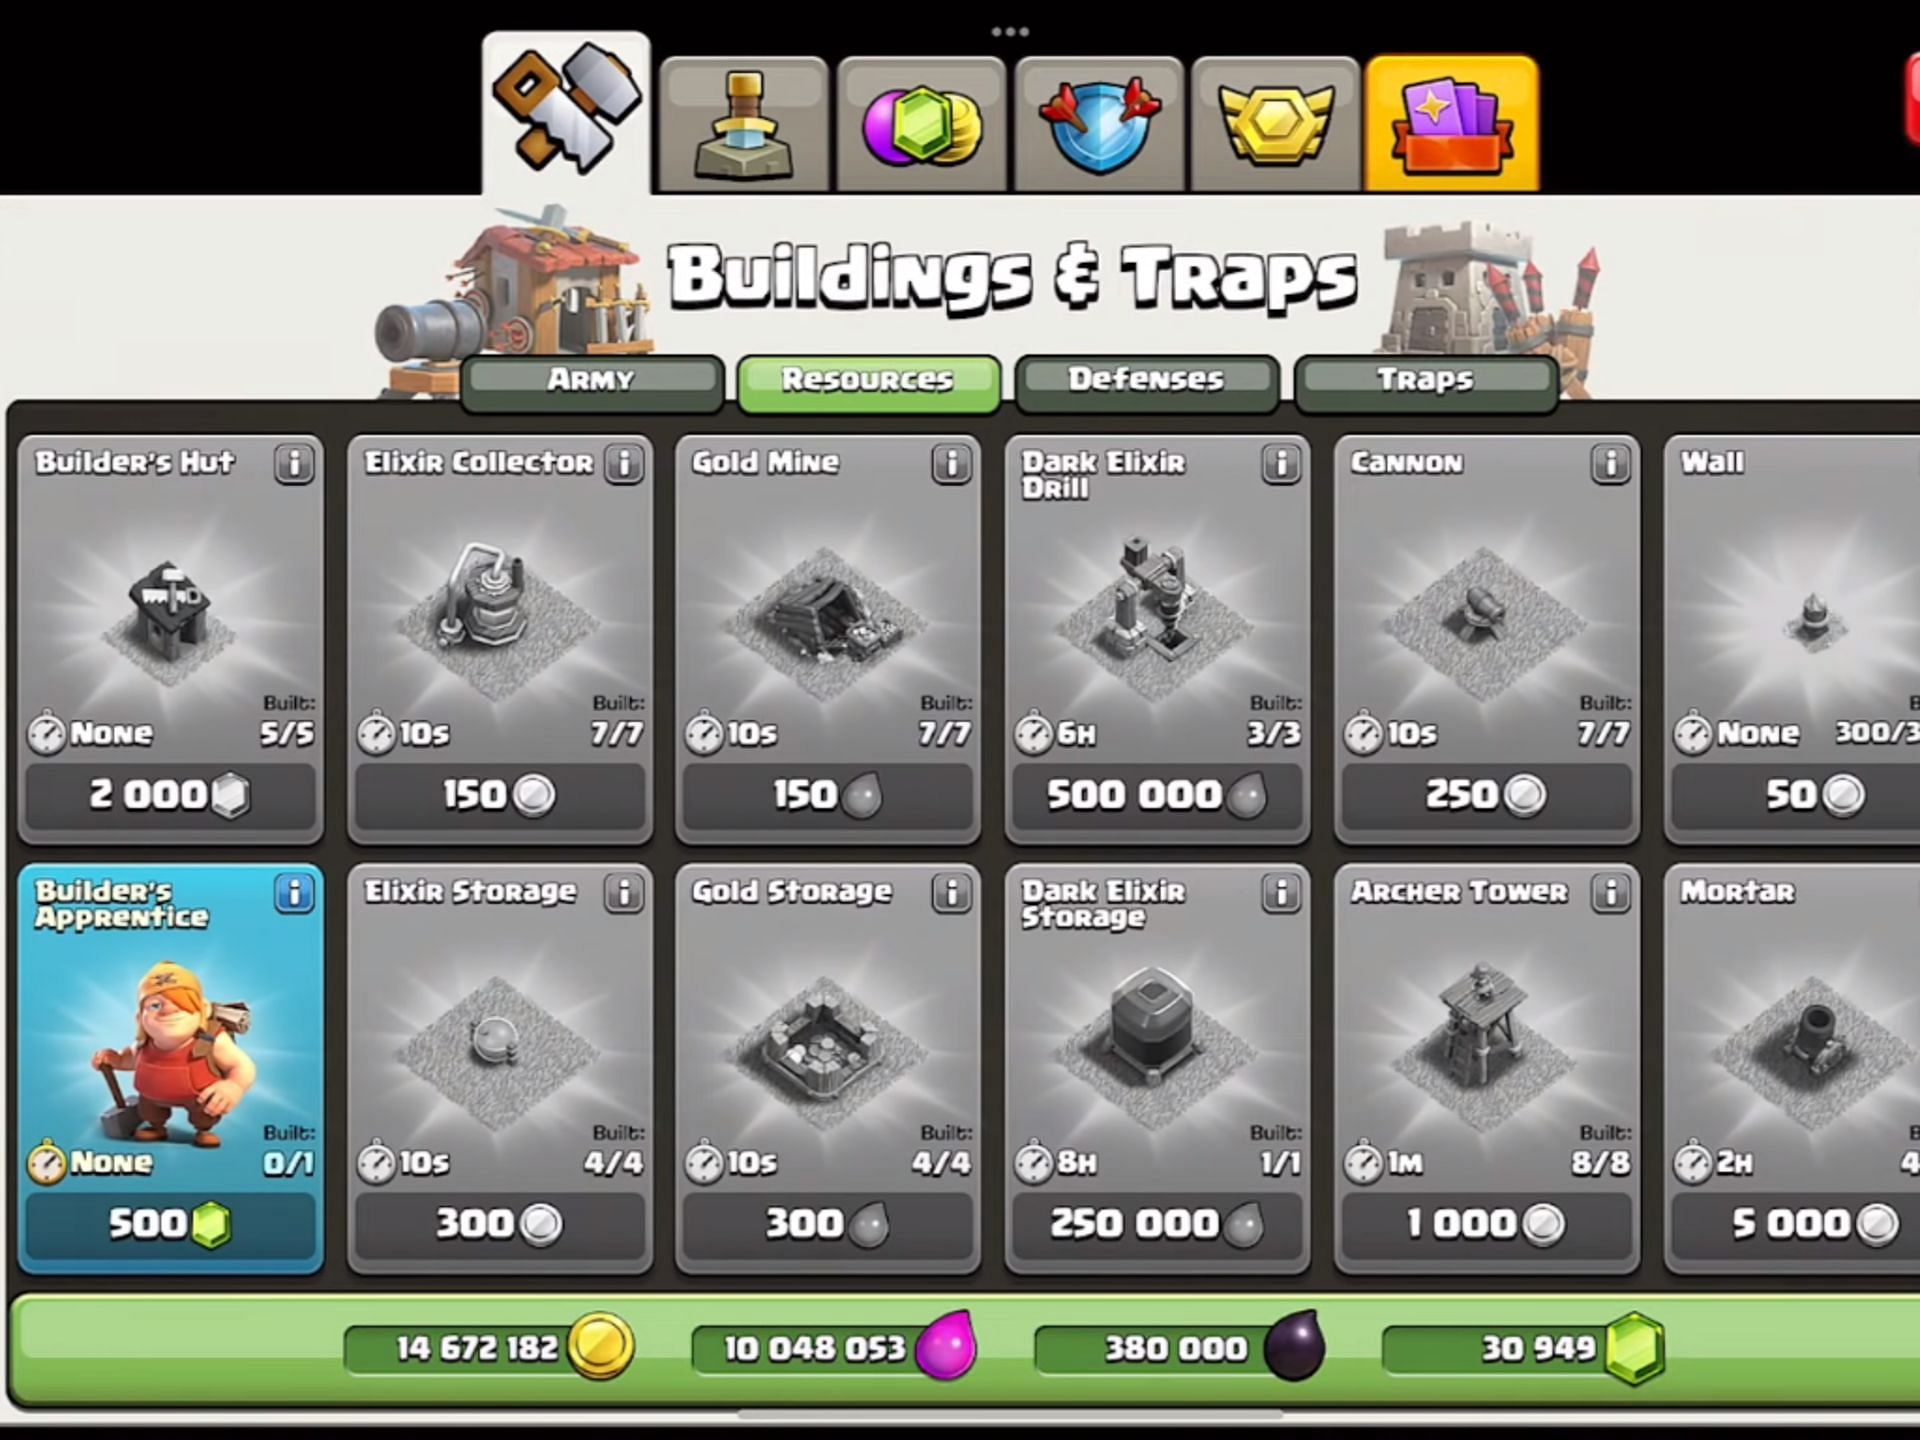 Builder&#039;s Apprentice is available in the shop (Image via Supercell)